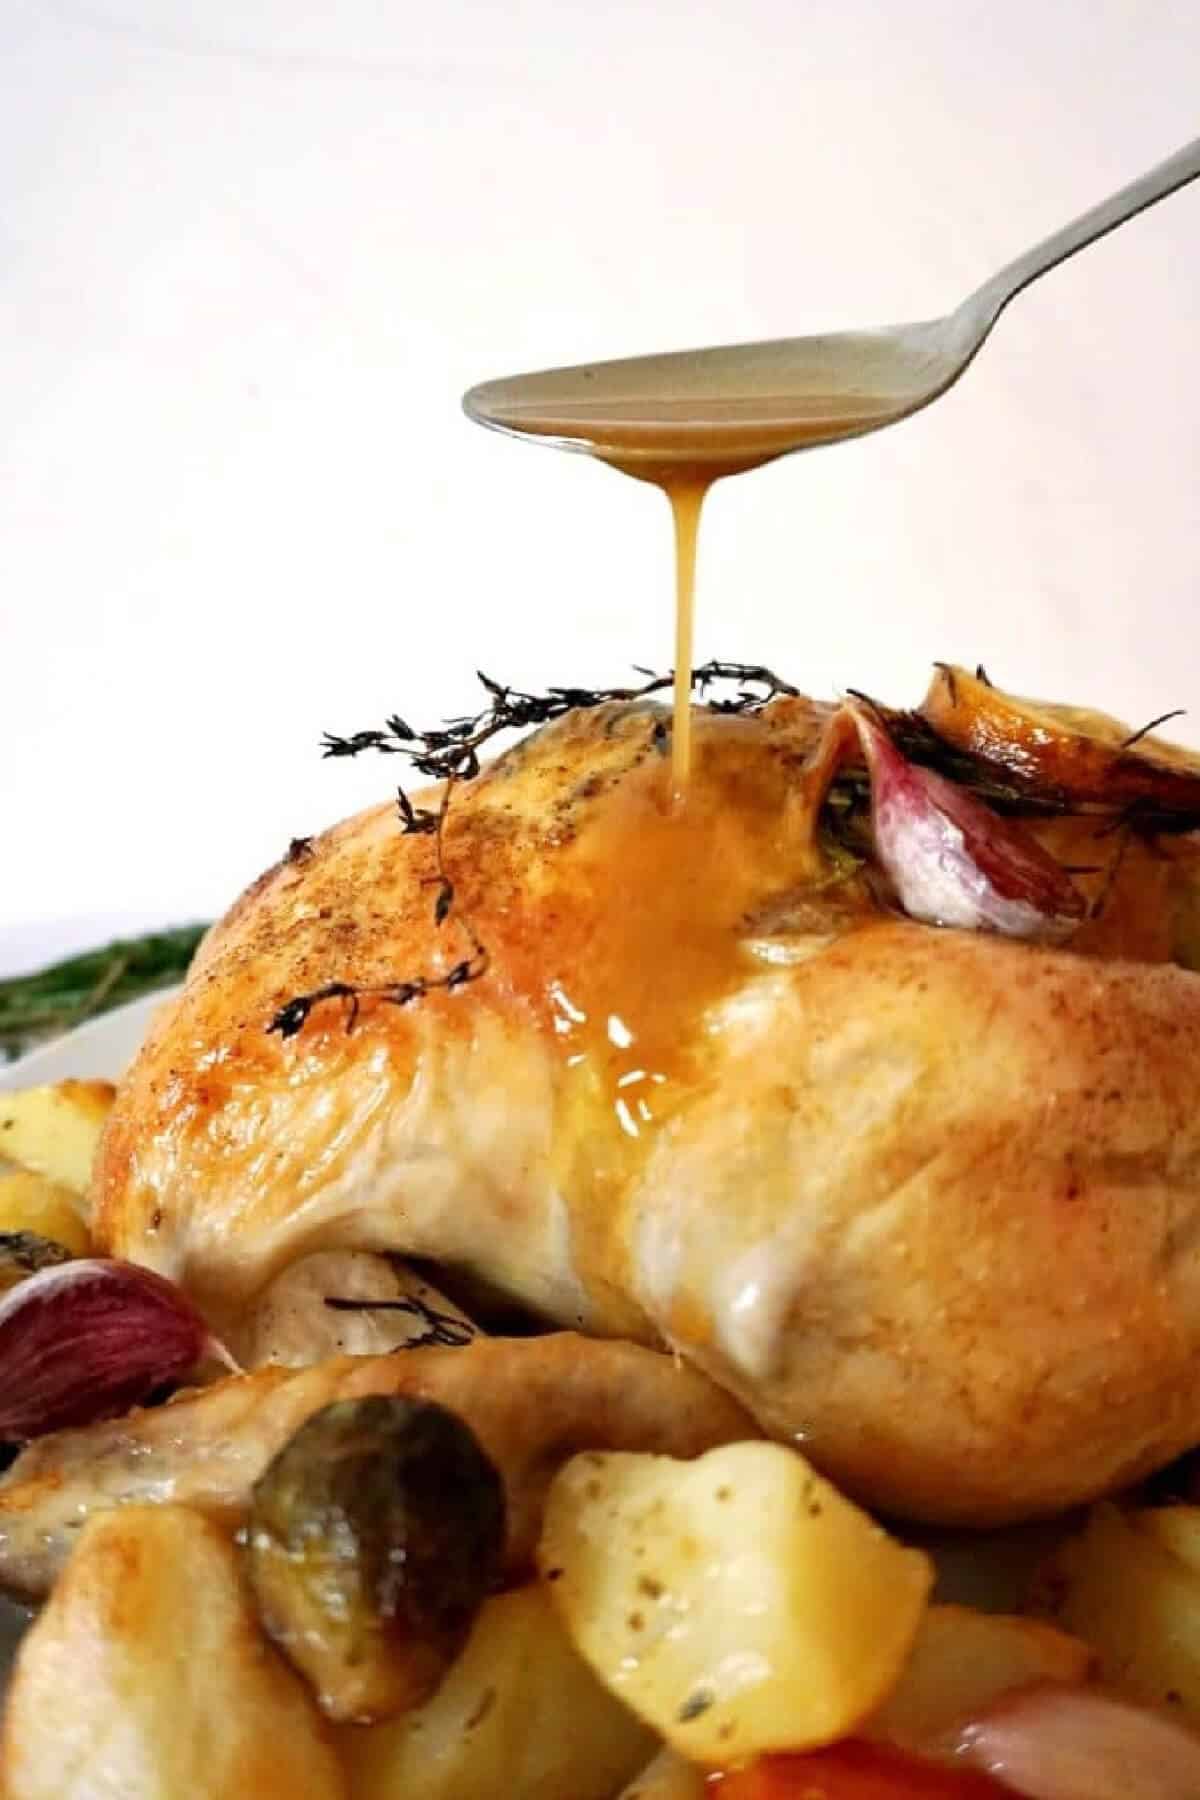 Gravy being poured over a whole roasted chicken.